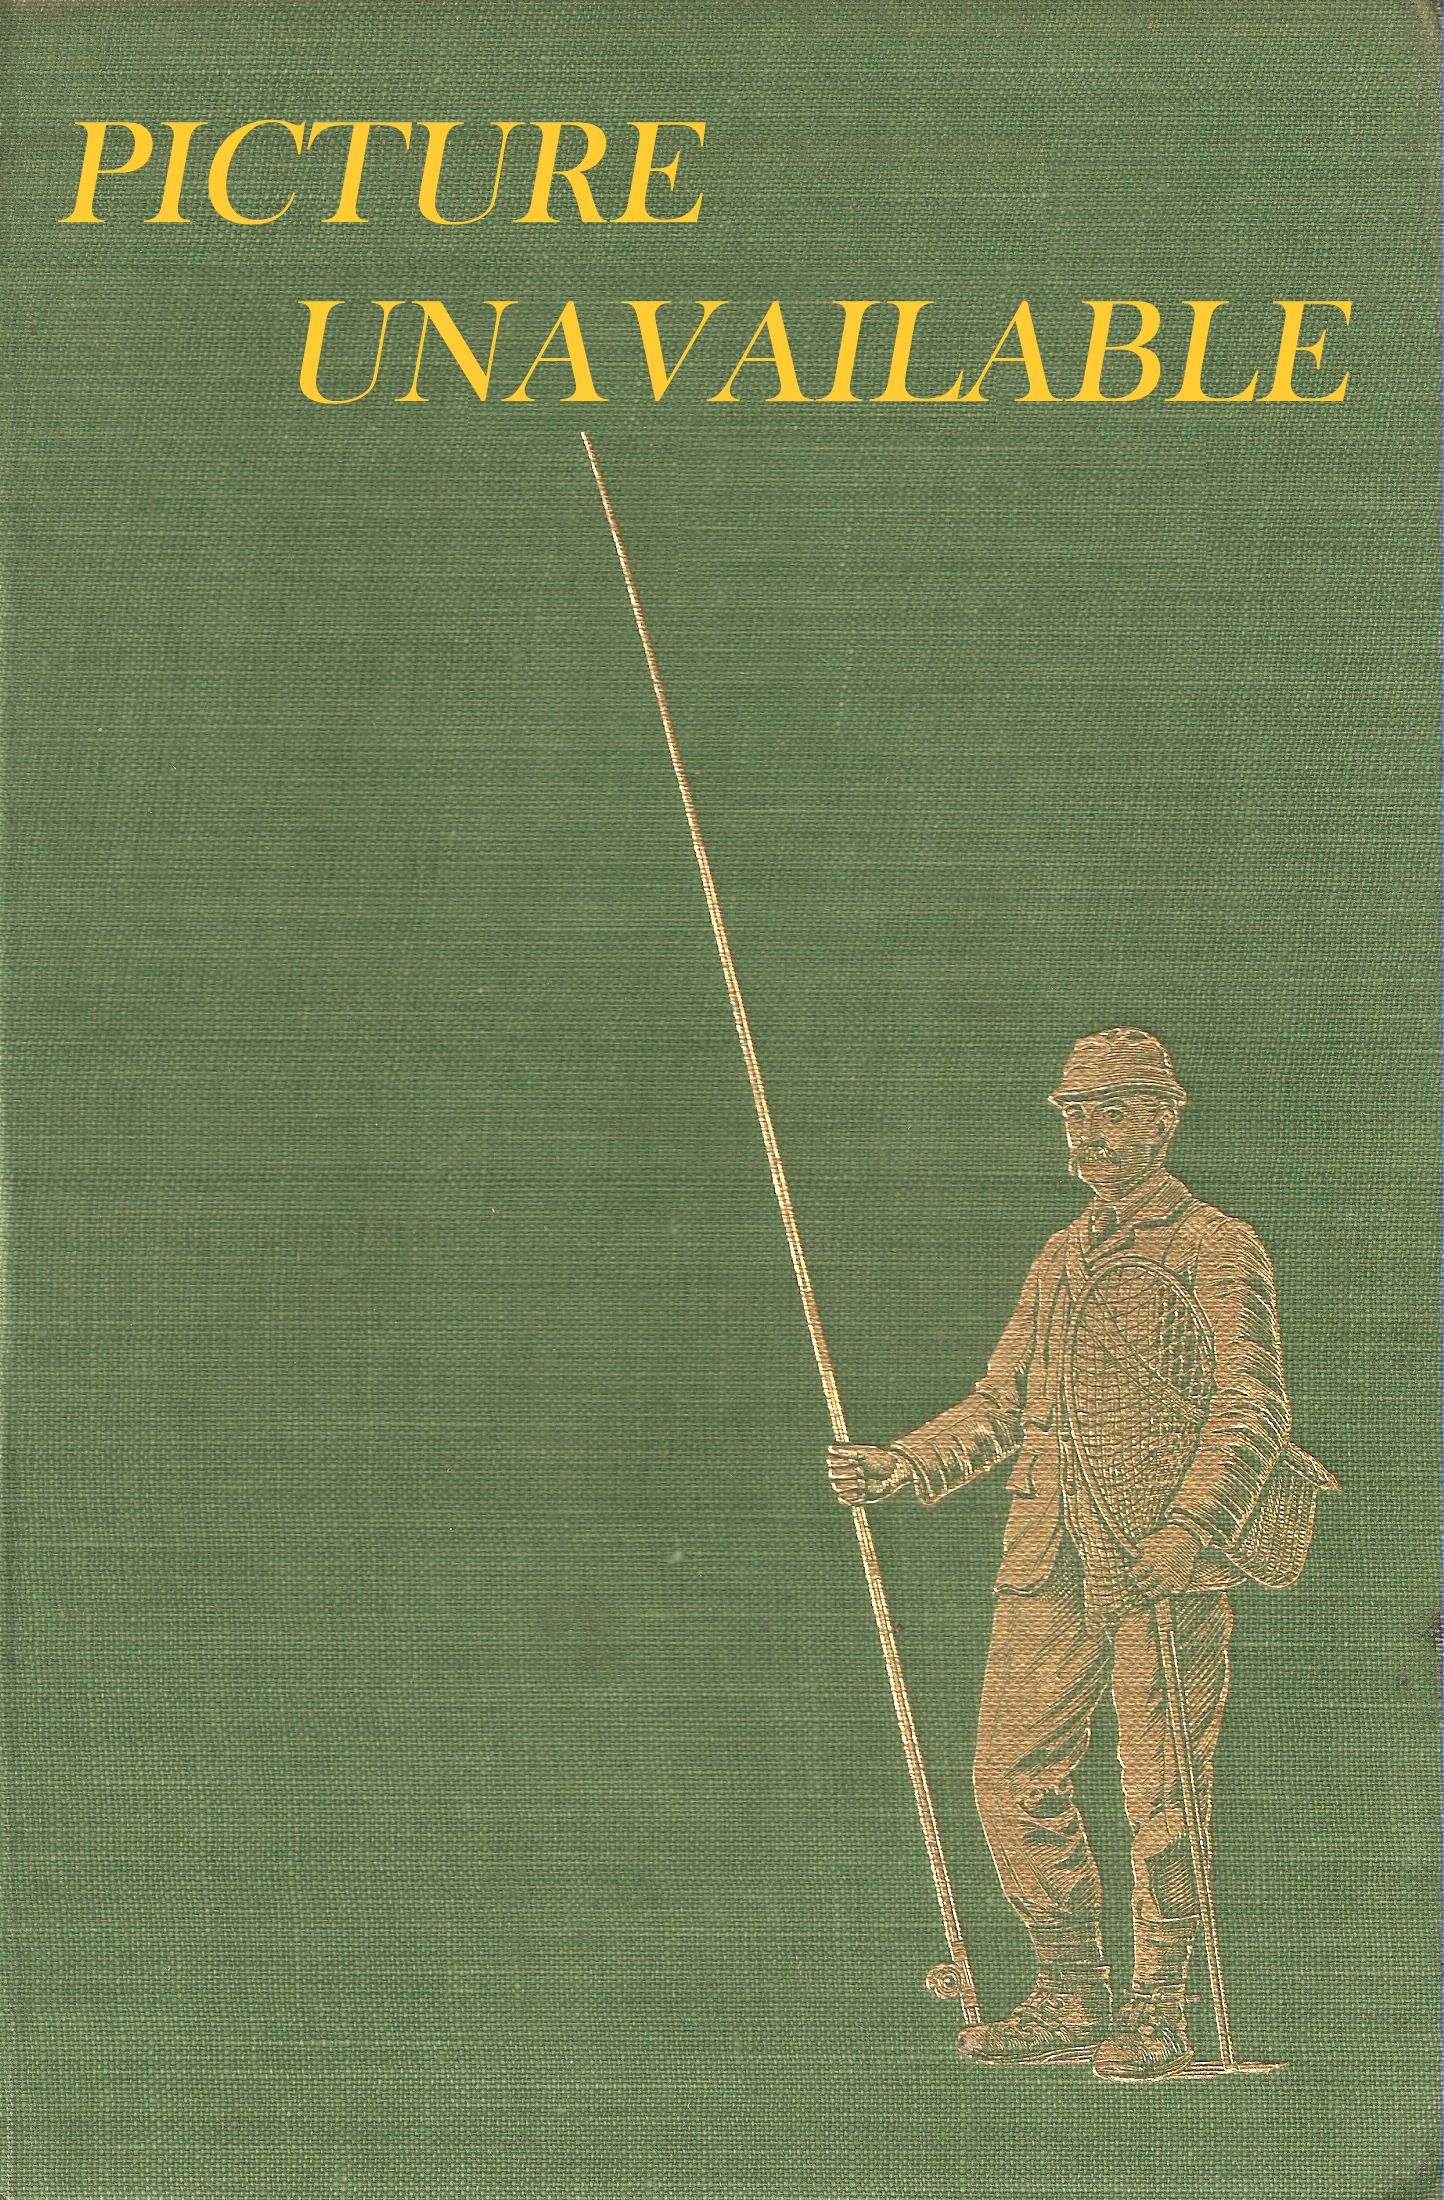 CASTING AROUND: ESSAYS ON THE ART OF ANGLING. By Major General R.N. Stewart.